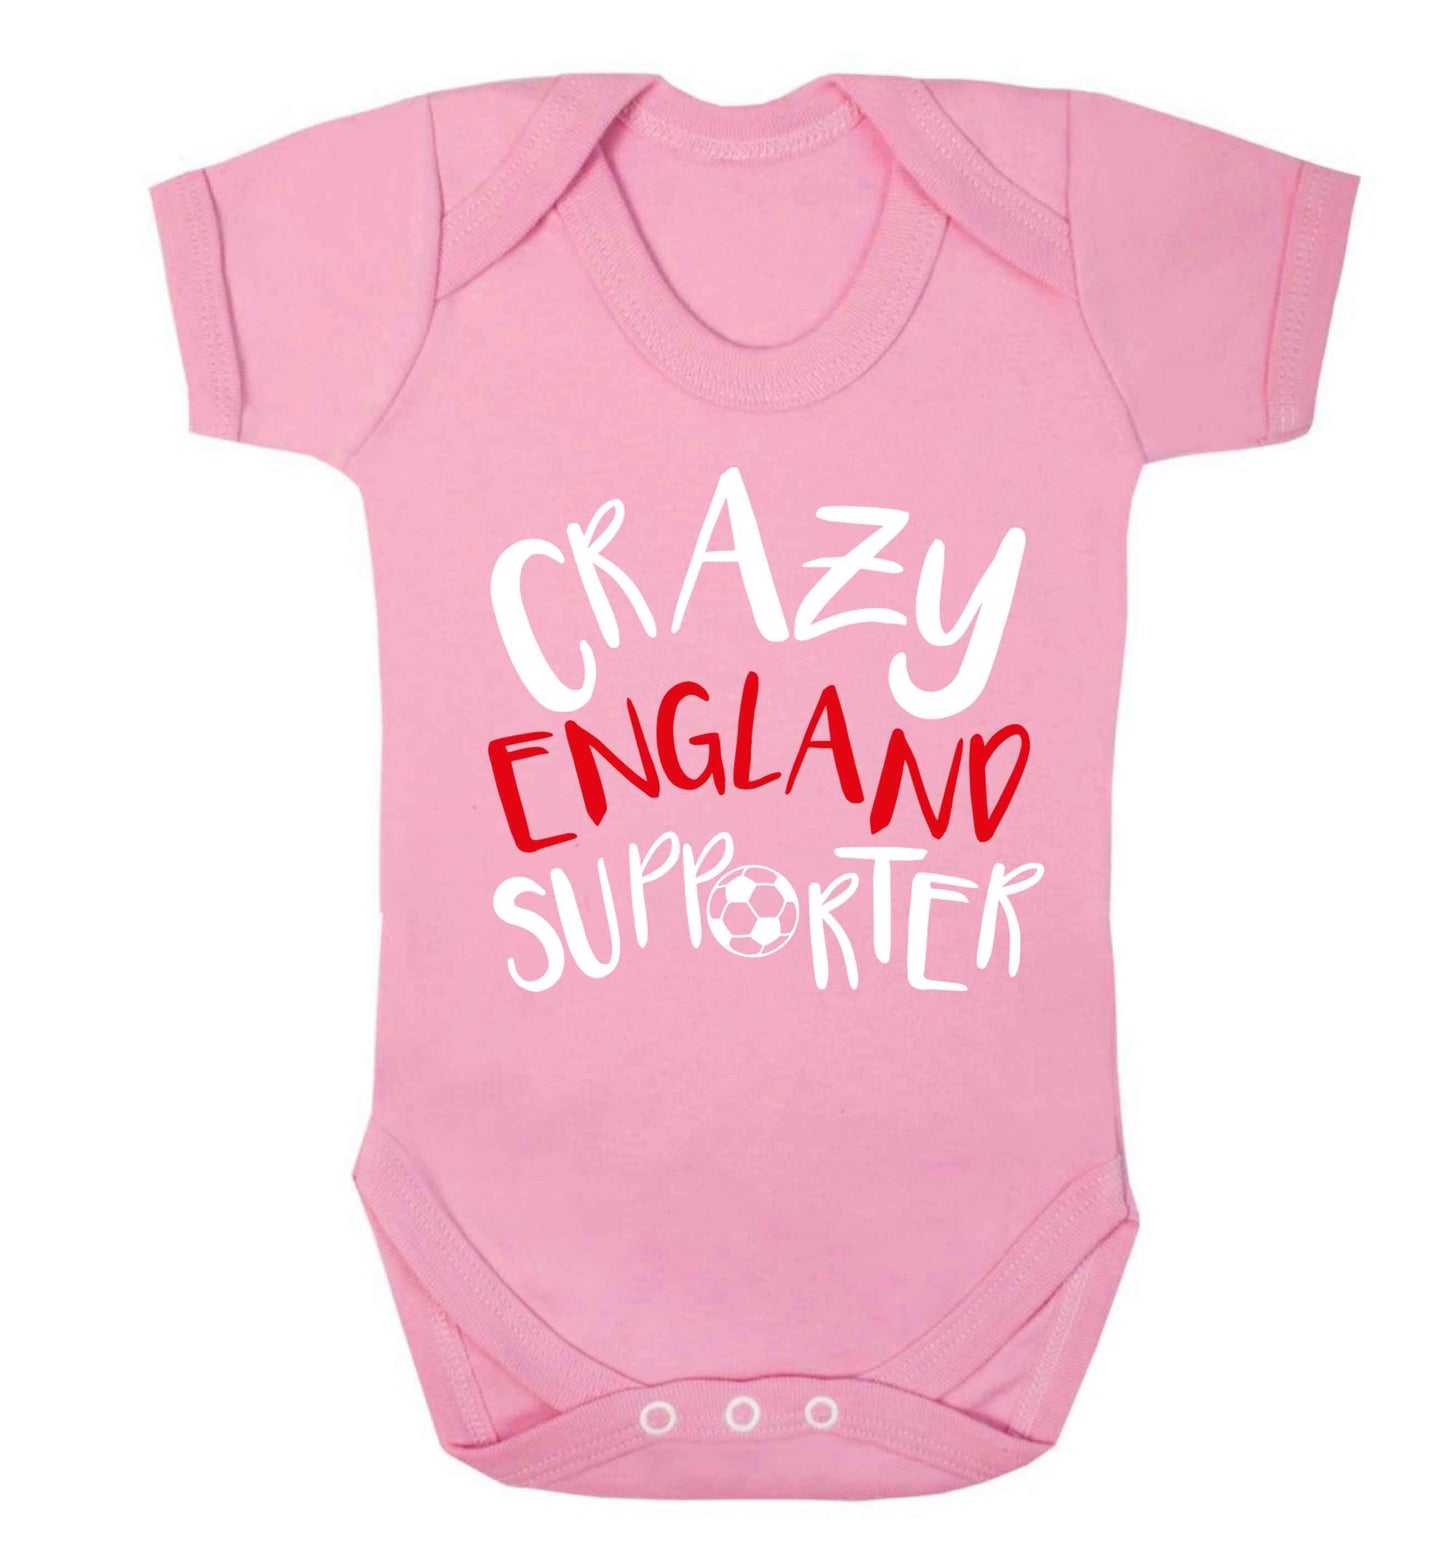 Crazy England supporter Baby Vest pale pink 18-24 months